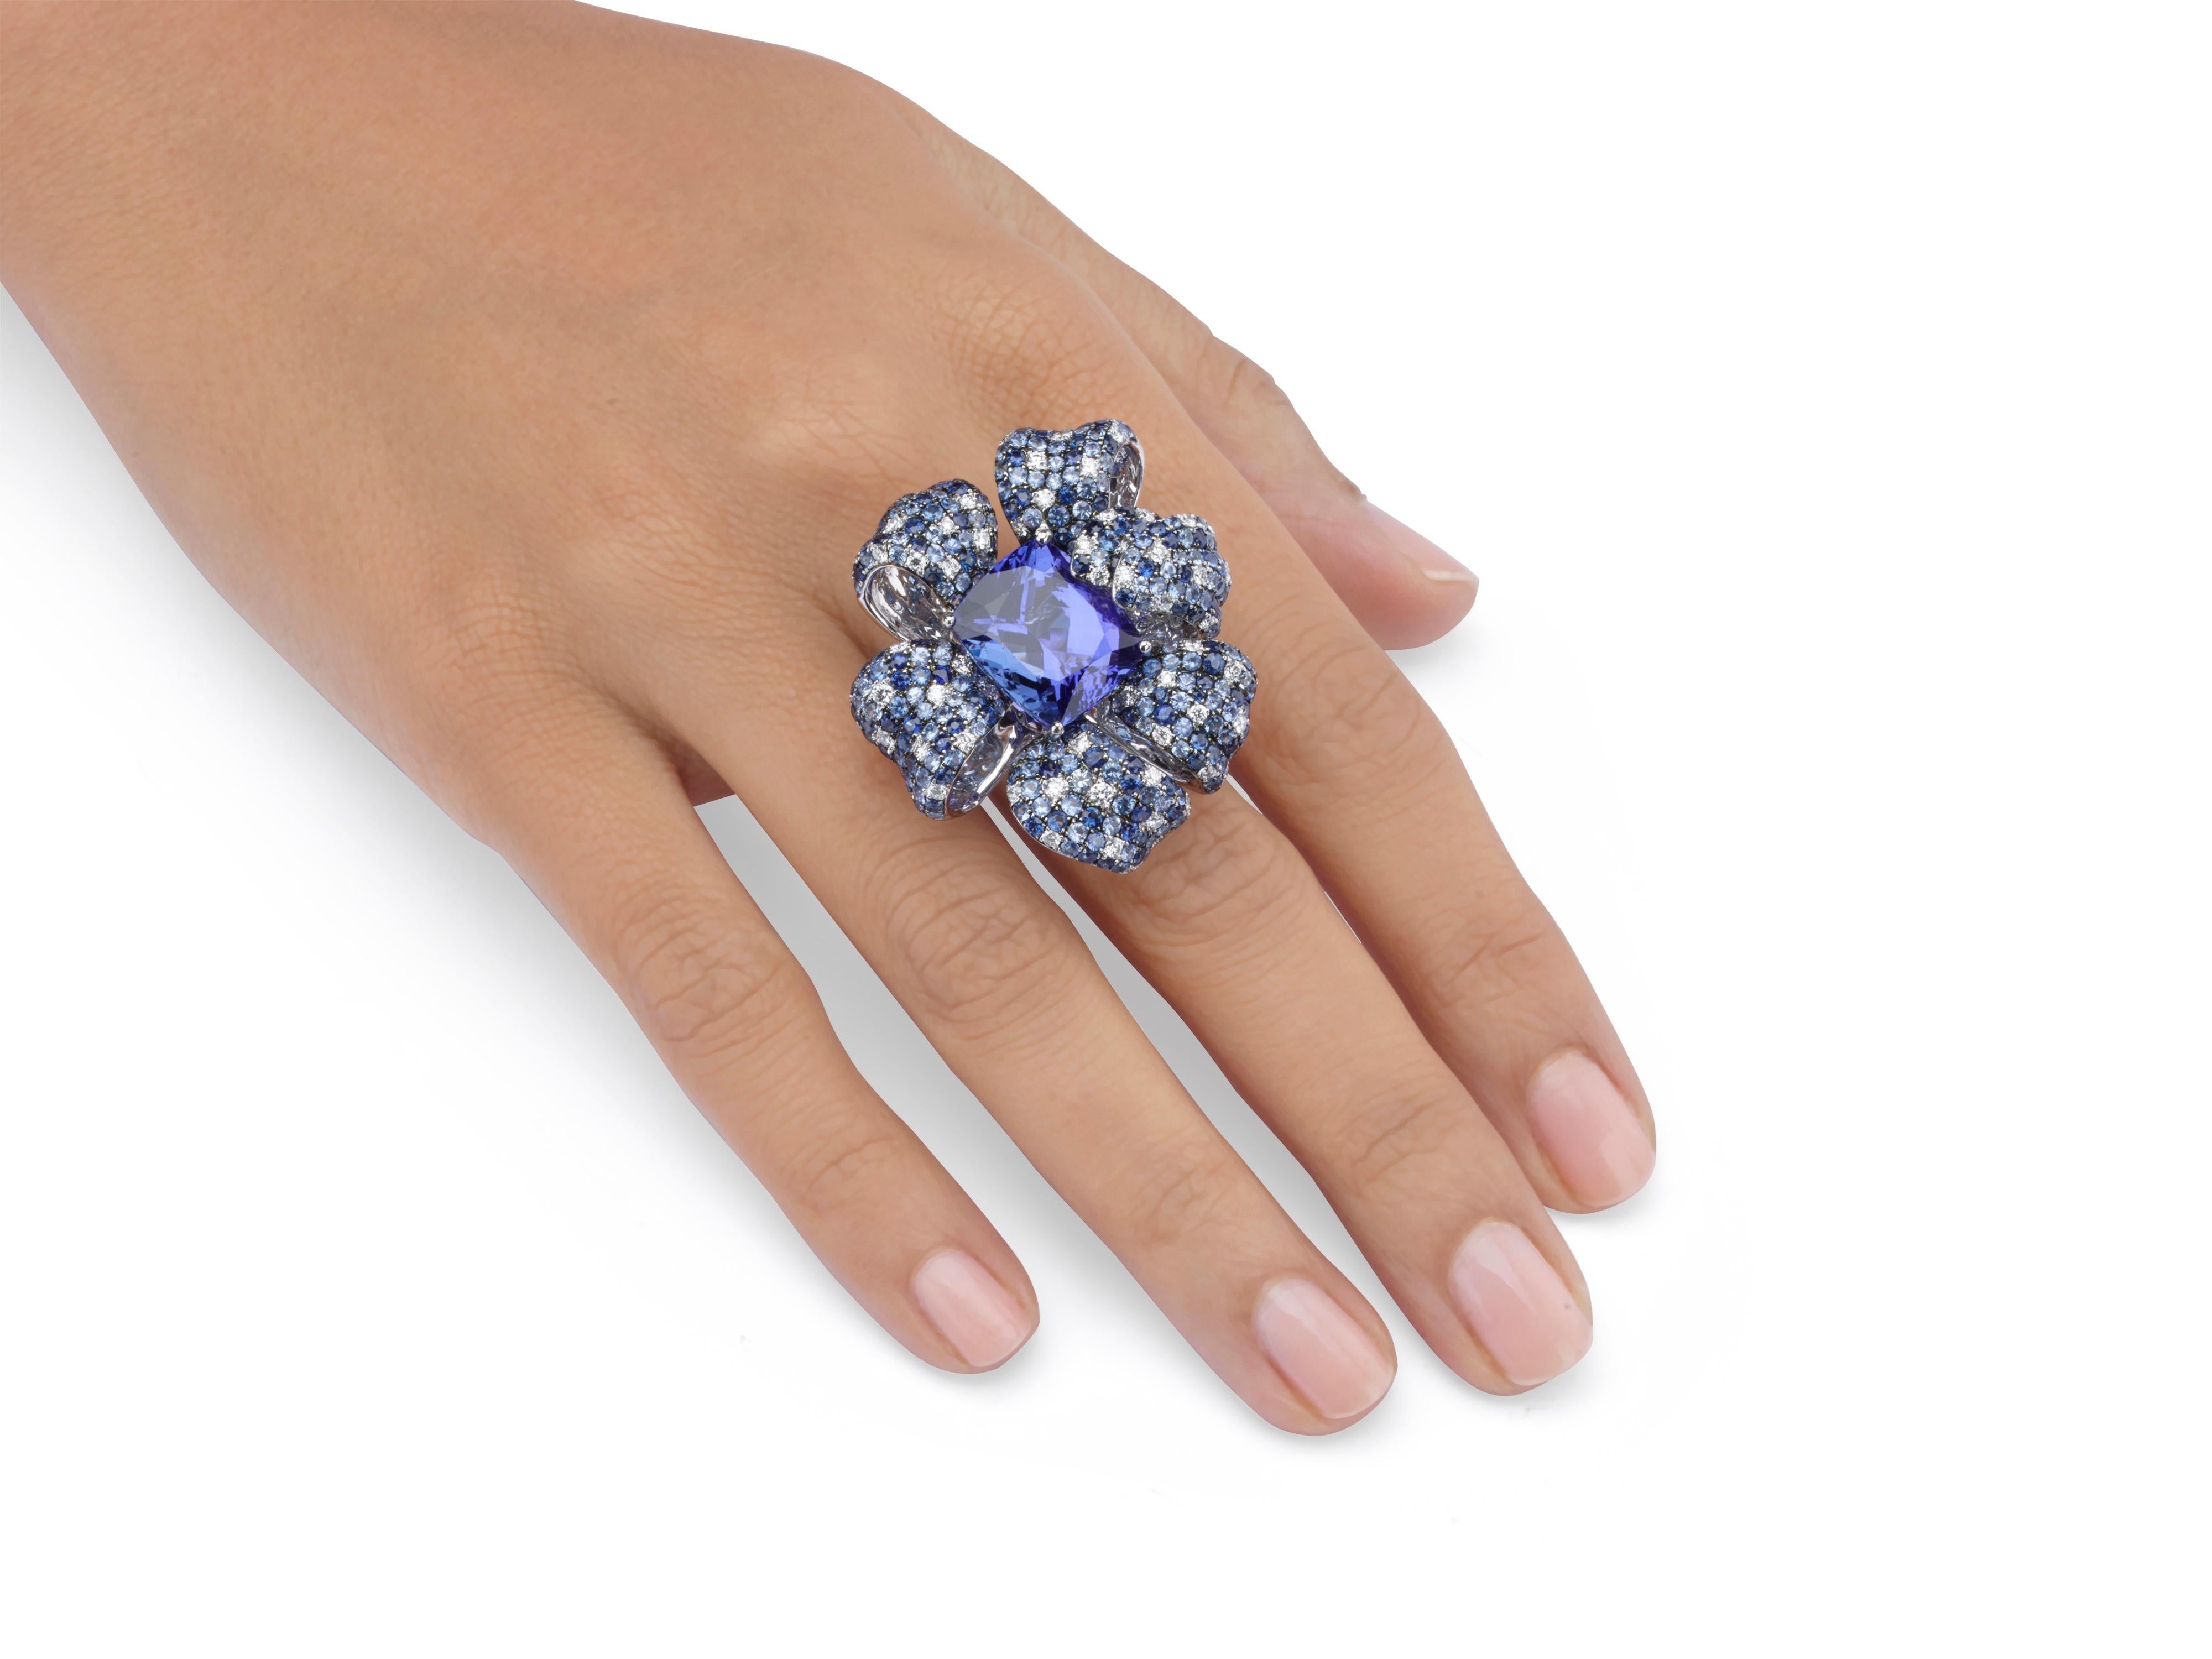 Butani's one-of-a-kind Trumpet Flower Ring features a floral silhouette with a stunning 13.12 carat blue cushion-cut tanzanite center, 7.8 carats of blue sapphires 1.29 carats of white round diamond-encrusted petals.  Set in 18K white